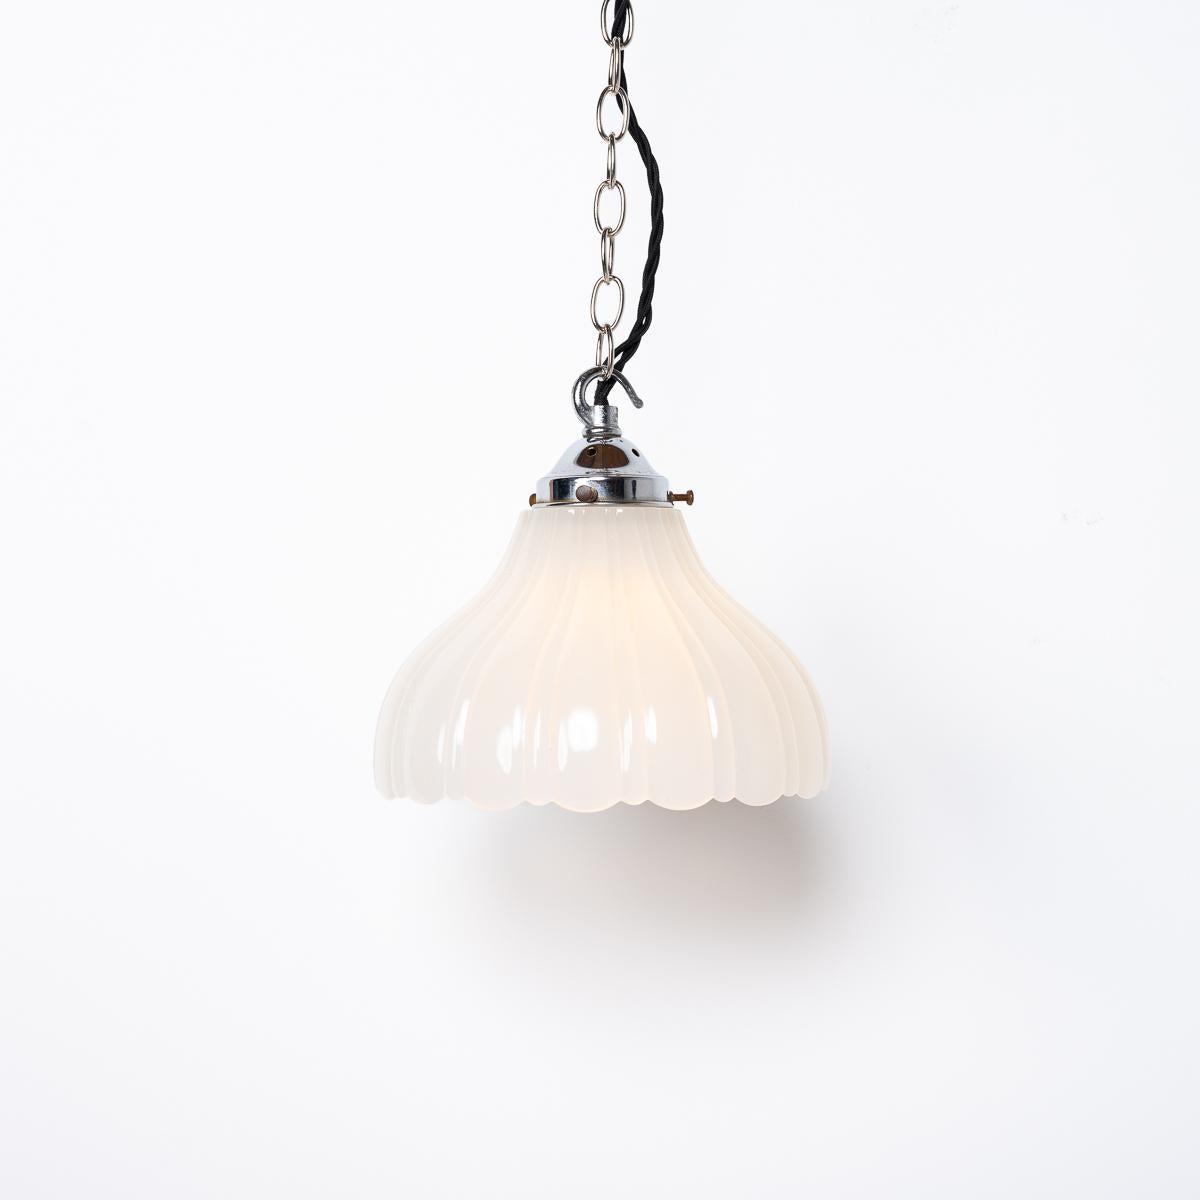 Mid-20th Century Pair of Antique Moonstone Glass Pendant Lights with Chrome Fittings For Sale